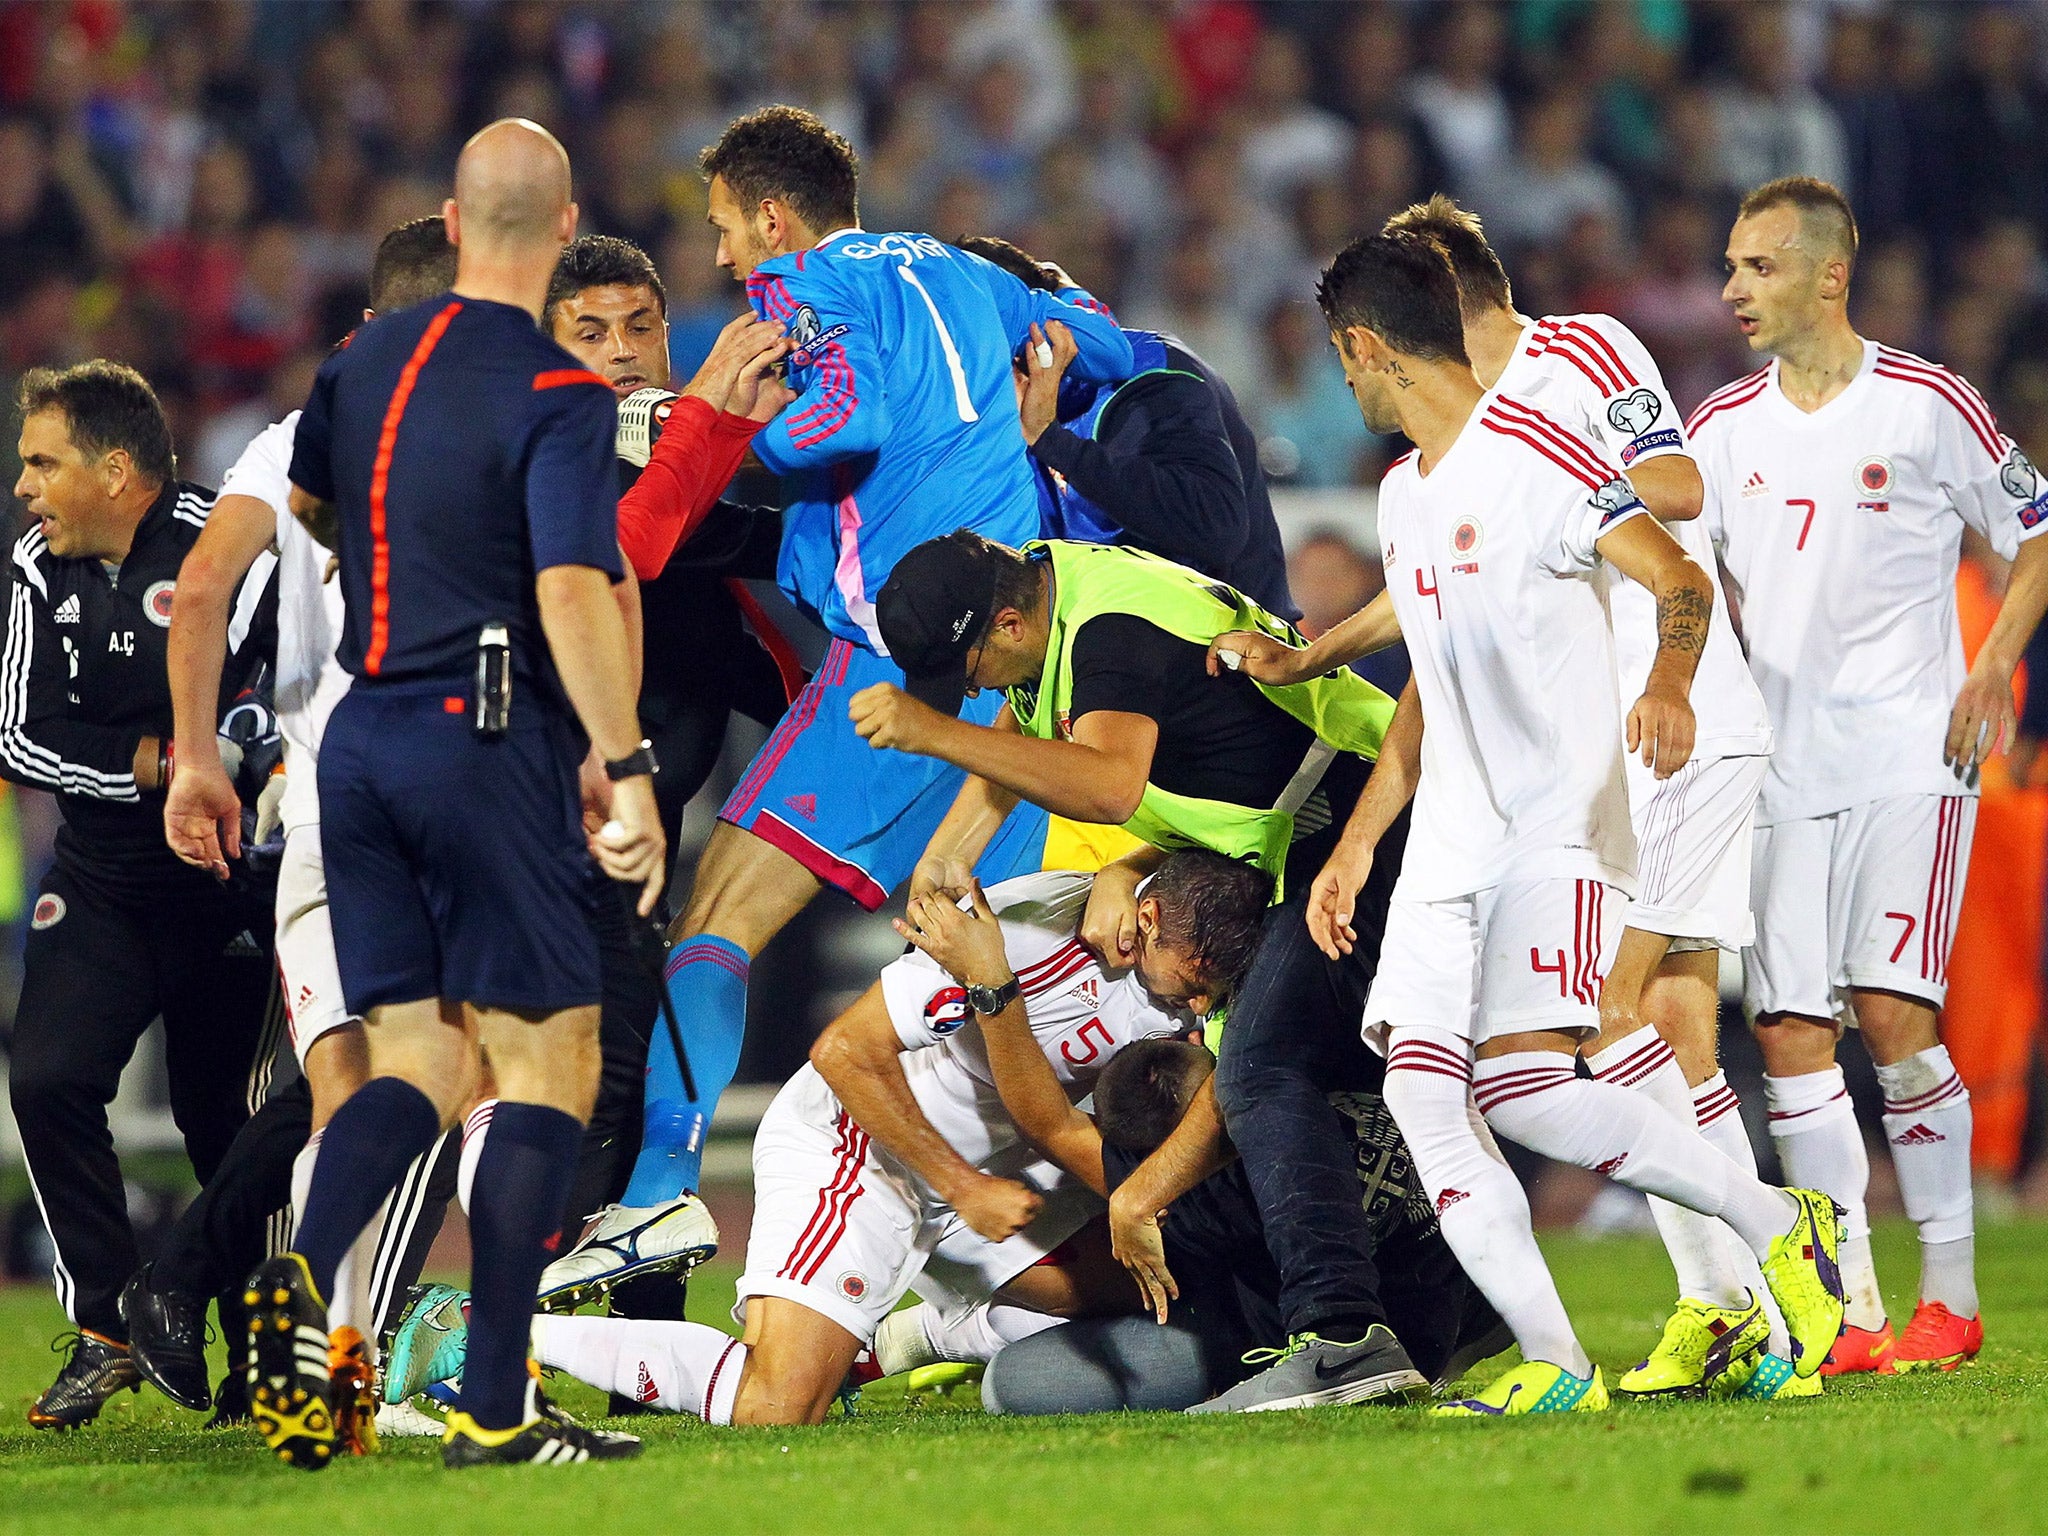 A brawl between players and supporters on the pitch